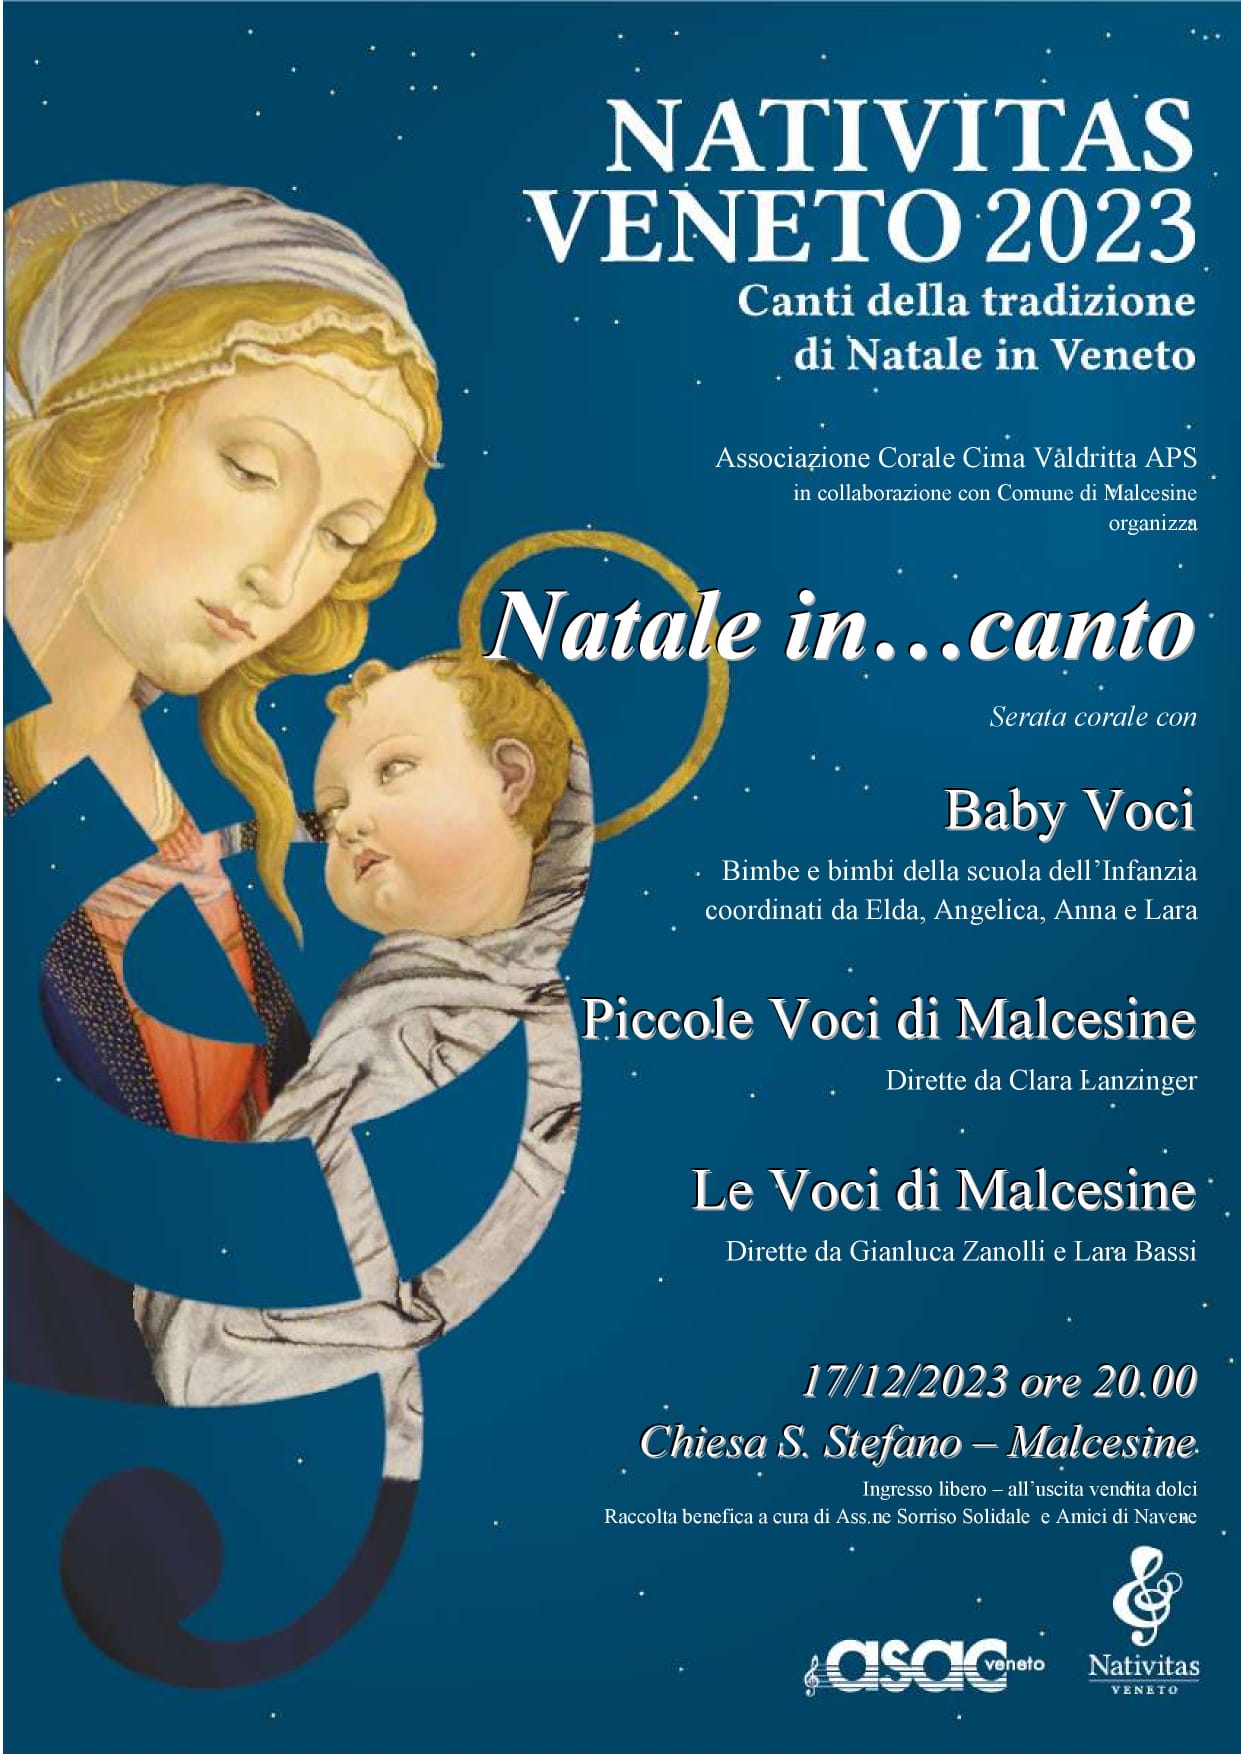 NATALE IN... CANTO